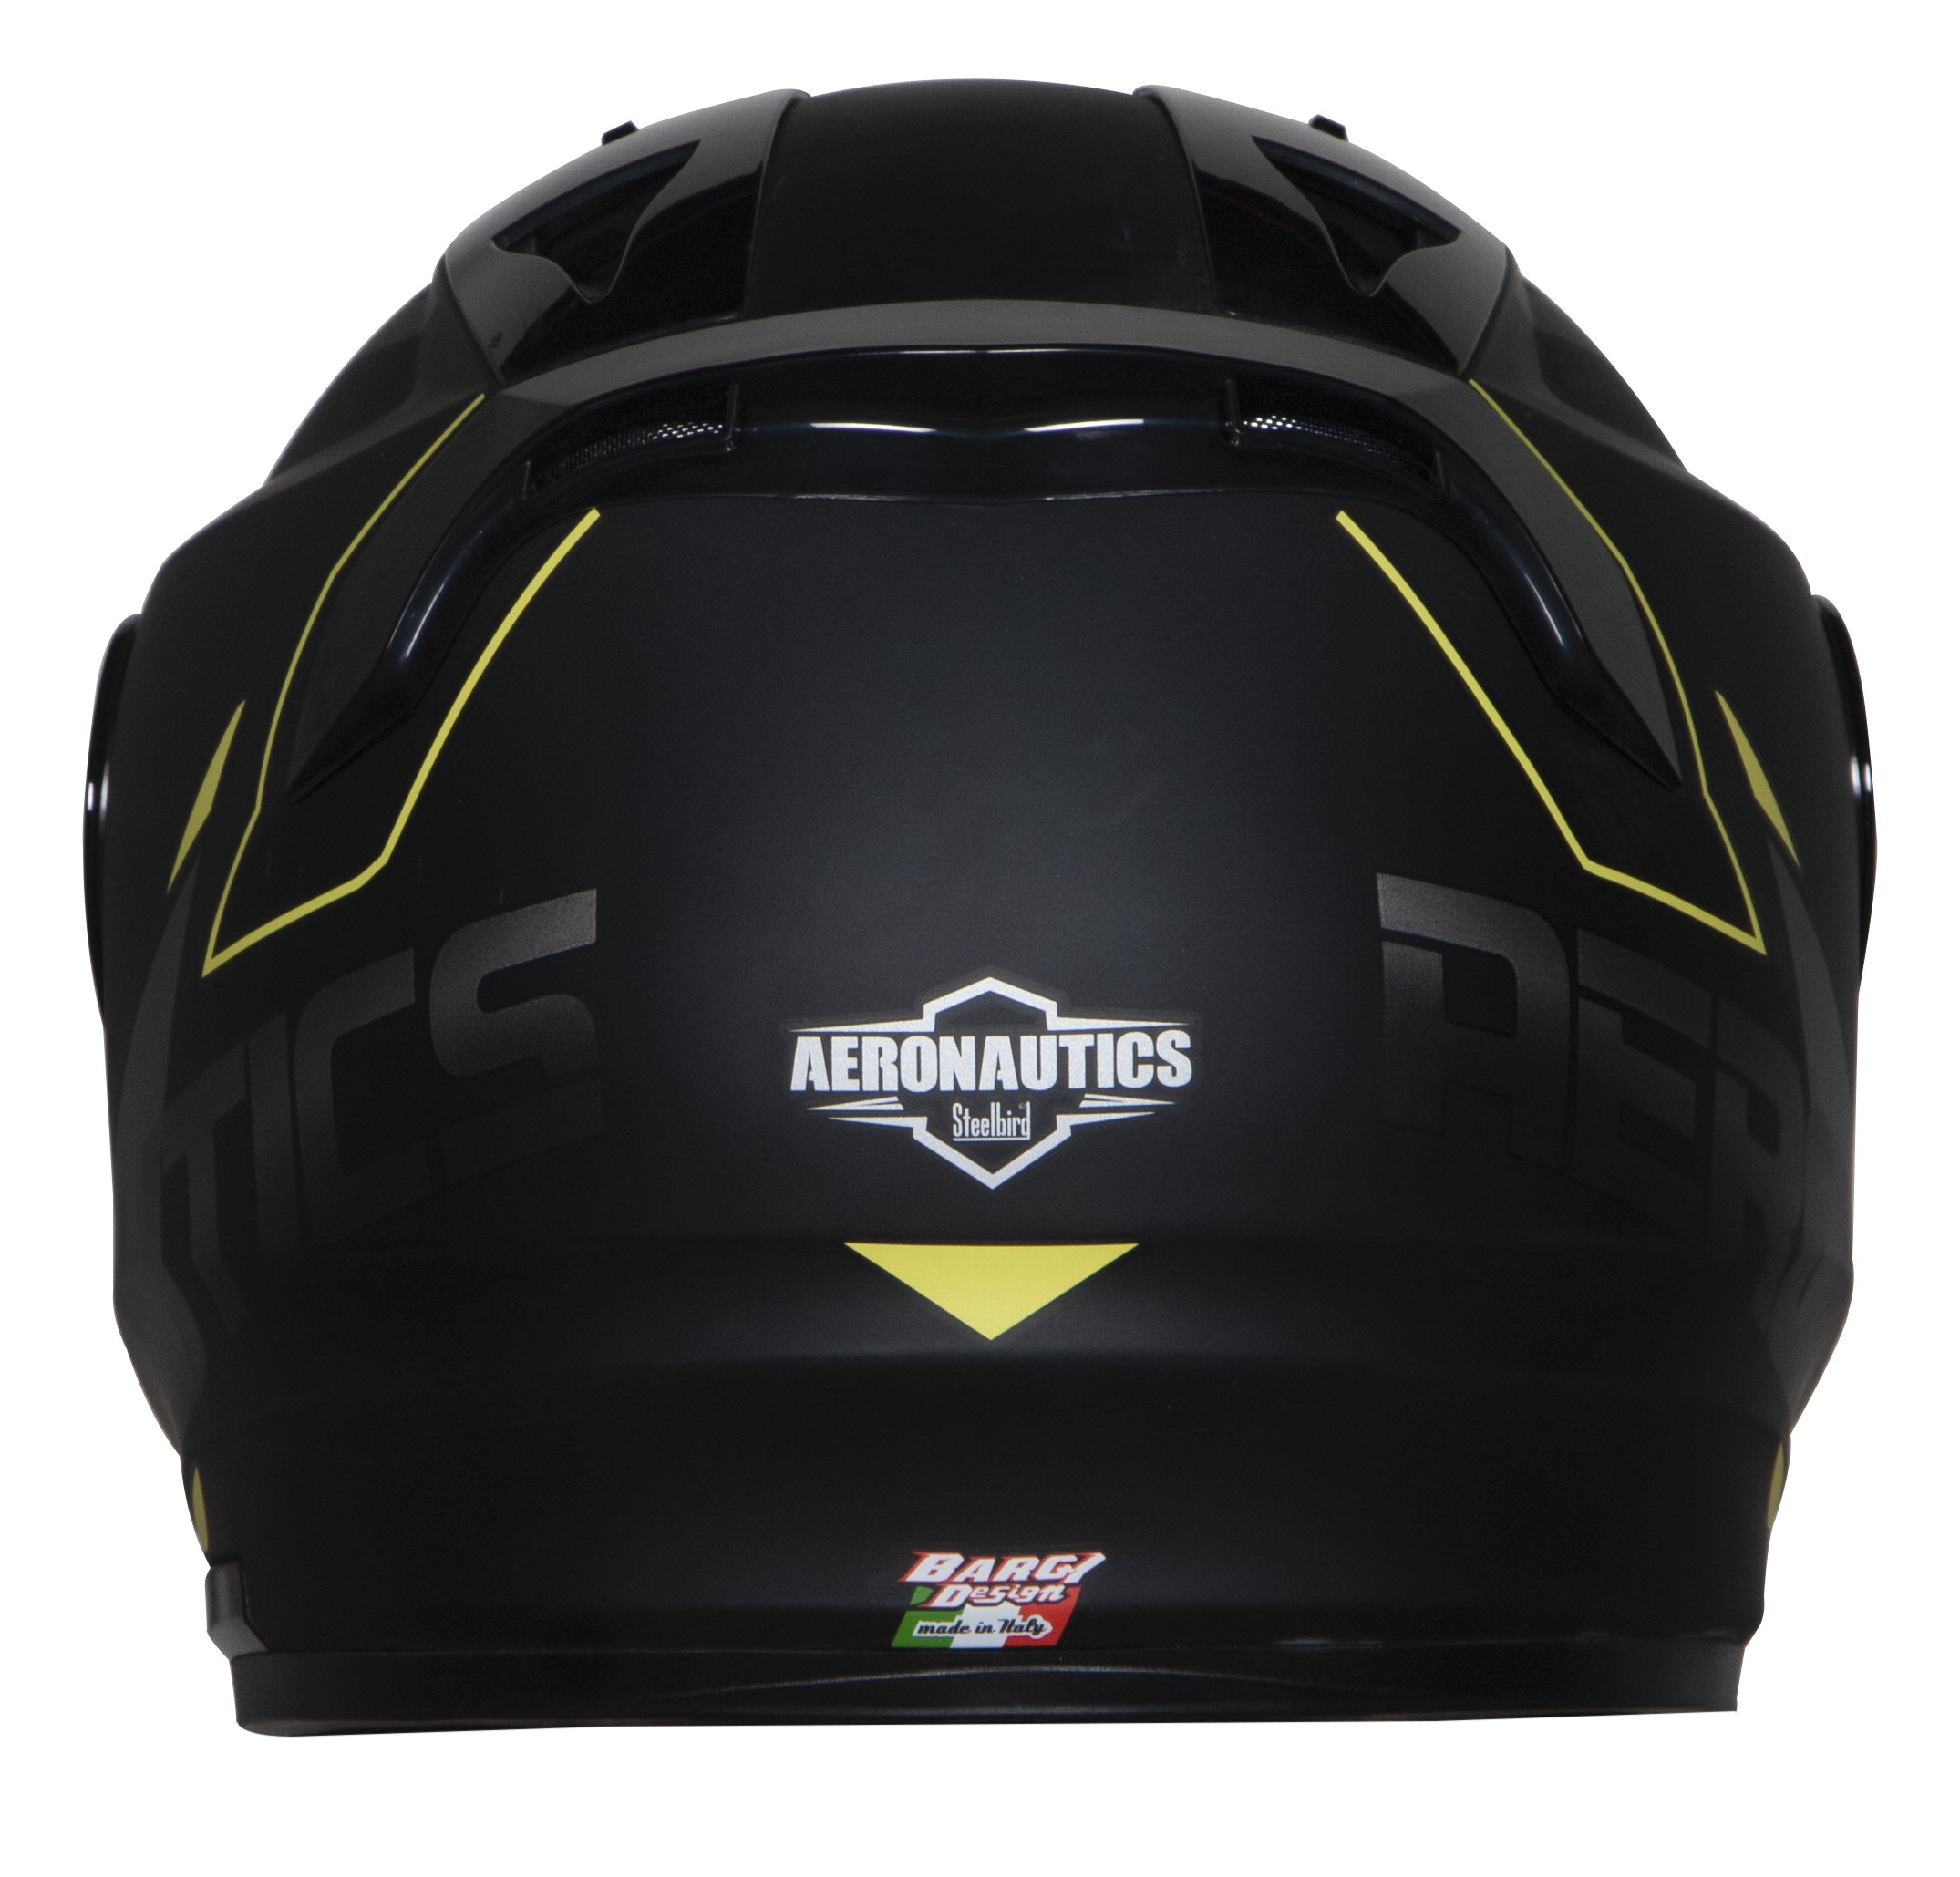 SA-1 RTW Mat Black/Yellow With Anti-Fog Shield Blue Chrome Visor(Fitted With Clear Visor Extra Blue Chrome Anti-Fog Shield Visor Free)